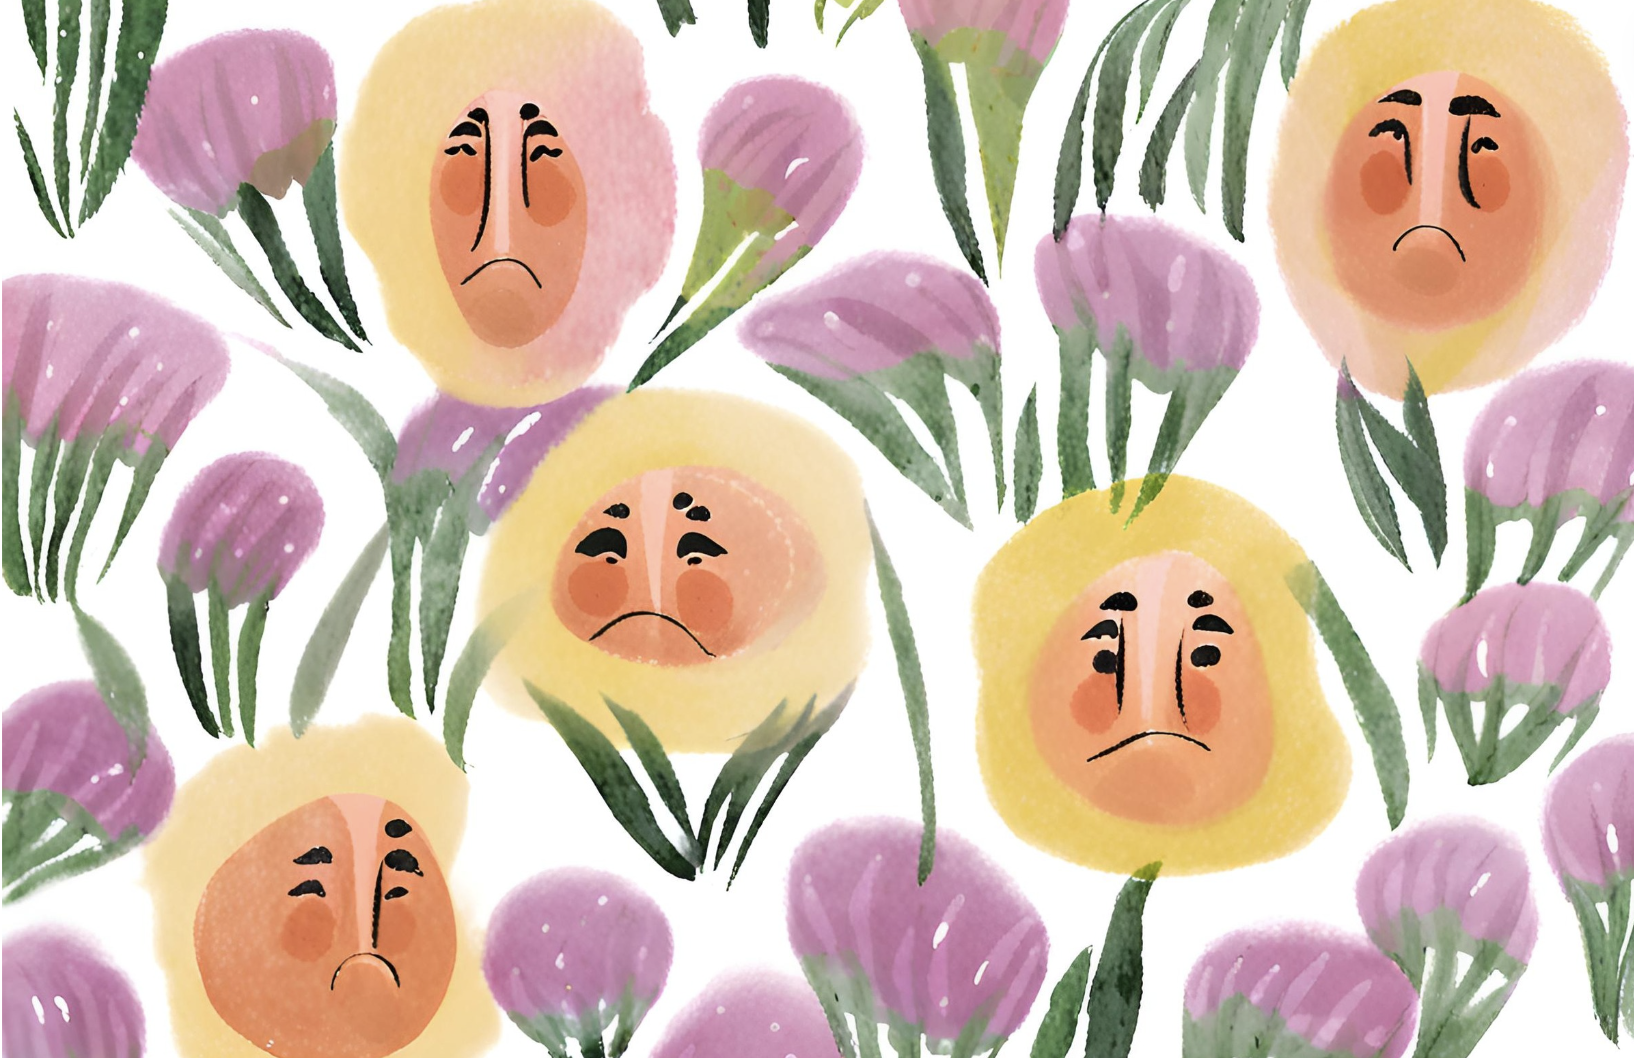 4 Healing Gardening Poems About Grief and Loss